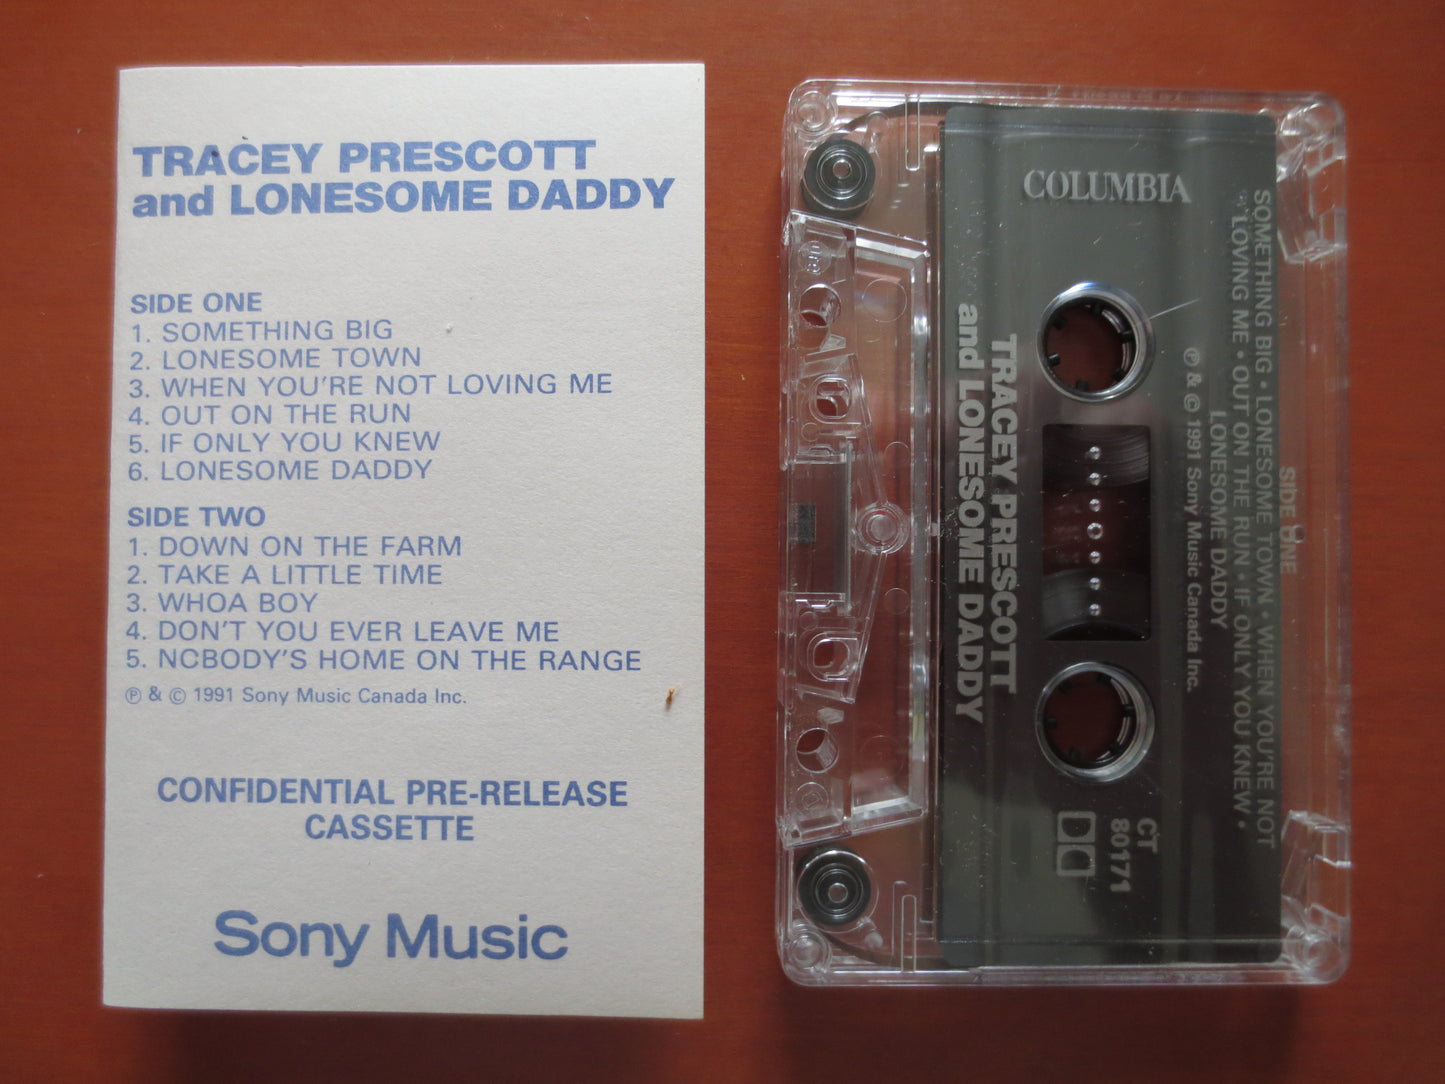 TRACEY PRESCOTT Tape, LONESOME Daddy, Tracey Prescott Lp, Music, Tape Cassette, Country Cassette, Country Song, 1991 Cassette